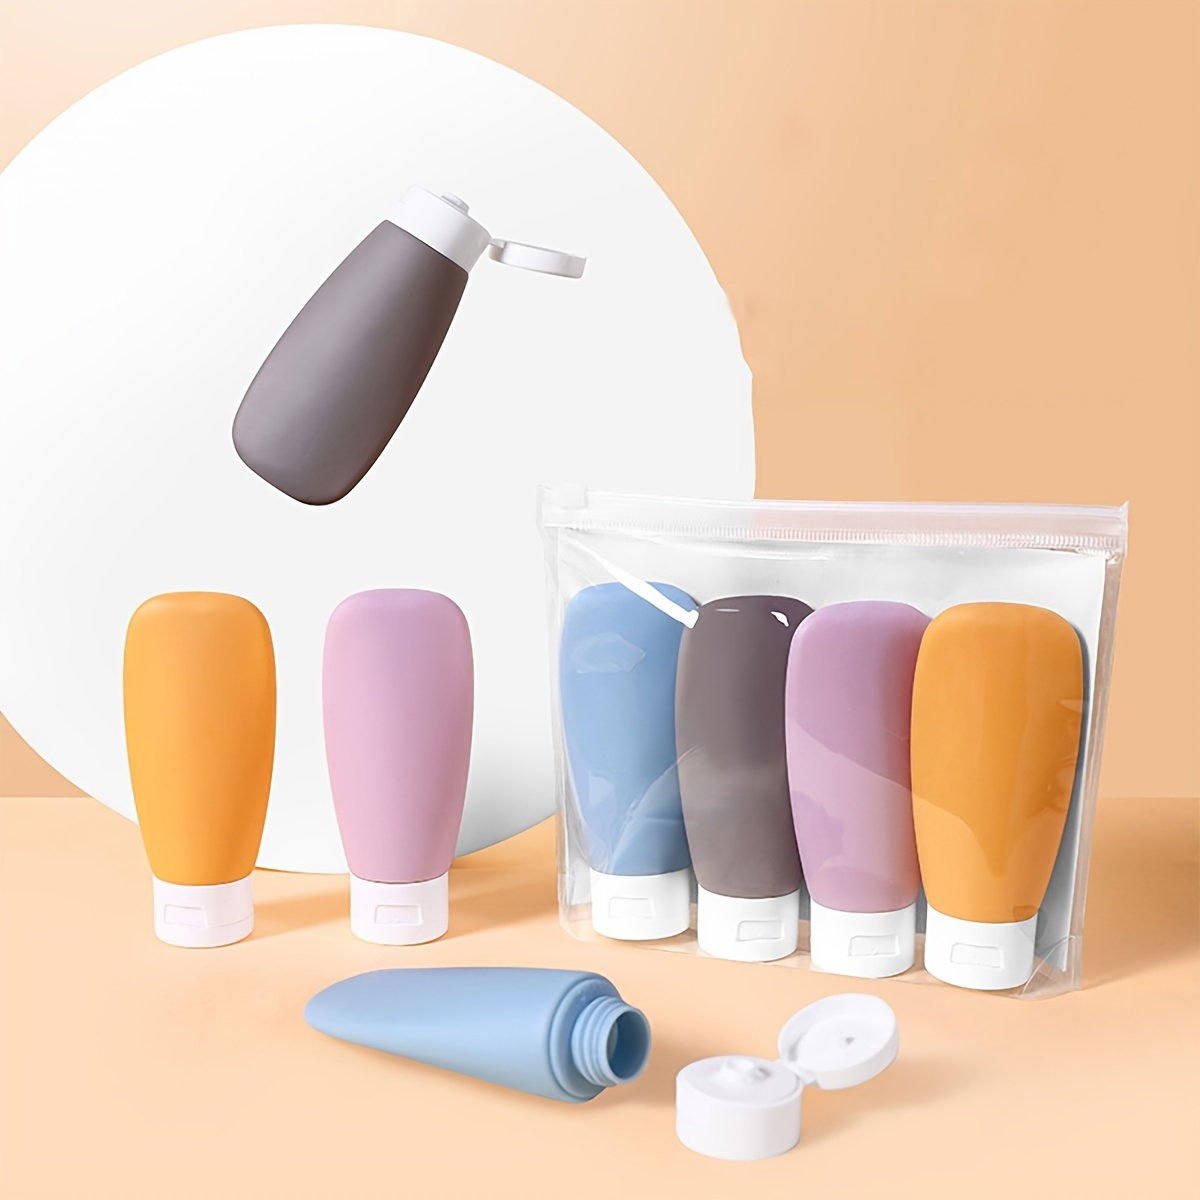 

4pcs Silicone Travel Bottles, Portable Squeeze Soft Lotion Containers, Refillable Shower Gel & Shampoo Cosmetic Bottles, Leak-proof Empty Tubes For Toiletries And Makeup